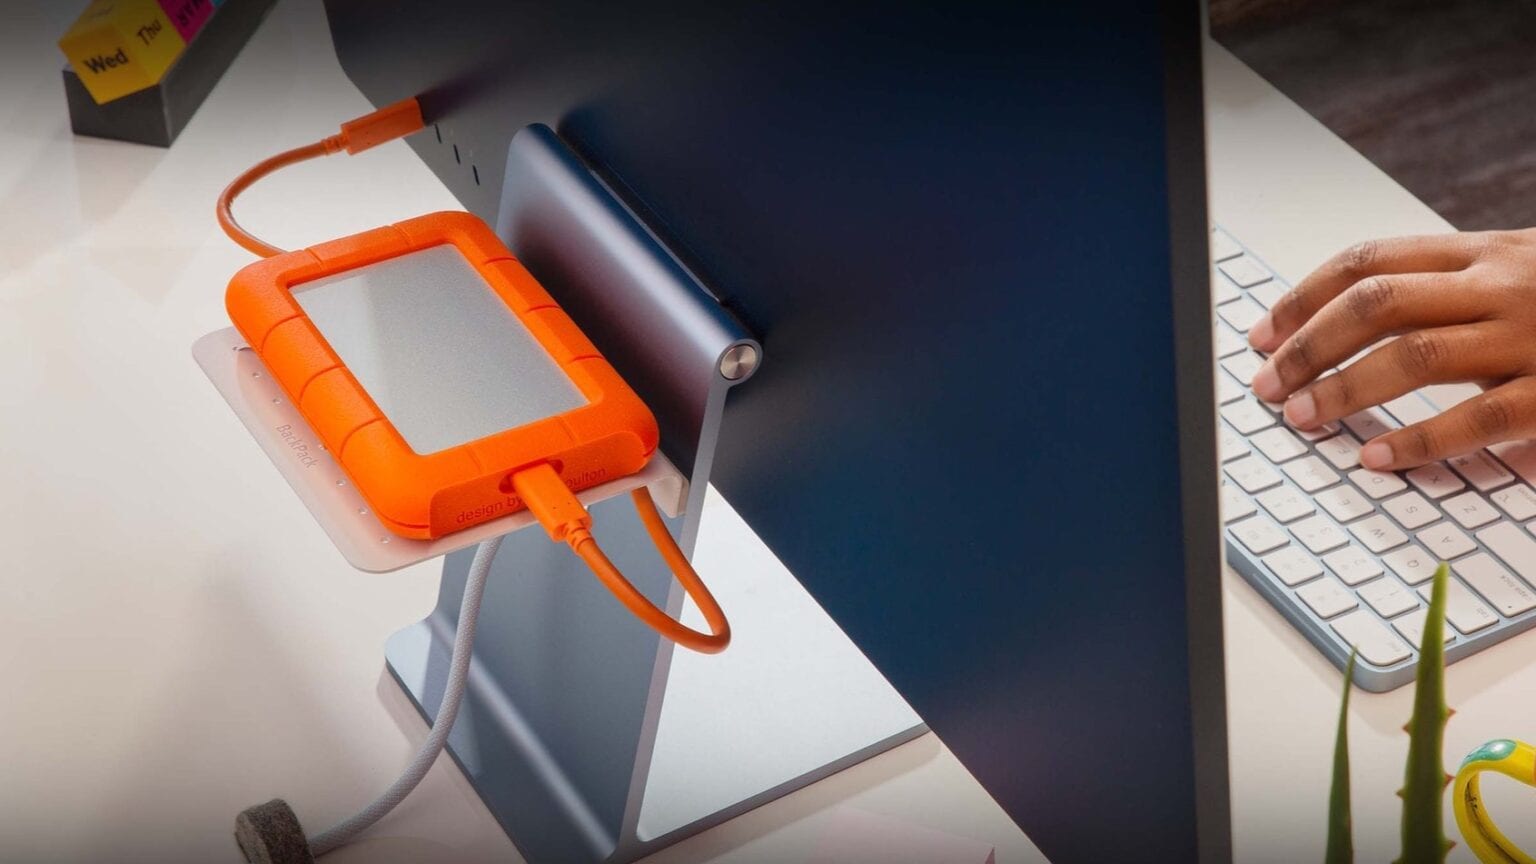 Put a BackPack on your iMac with this unique accessory